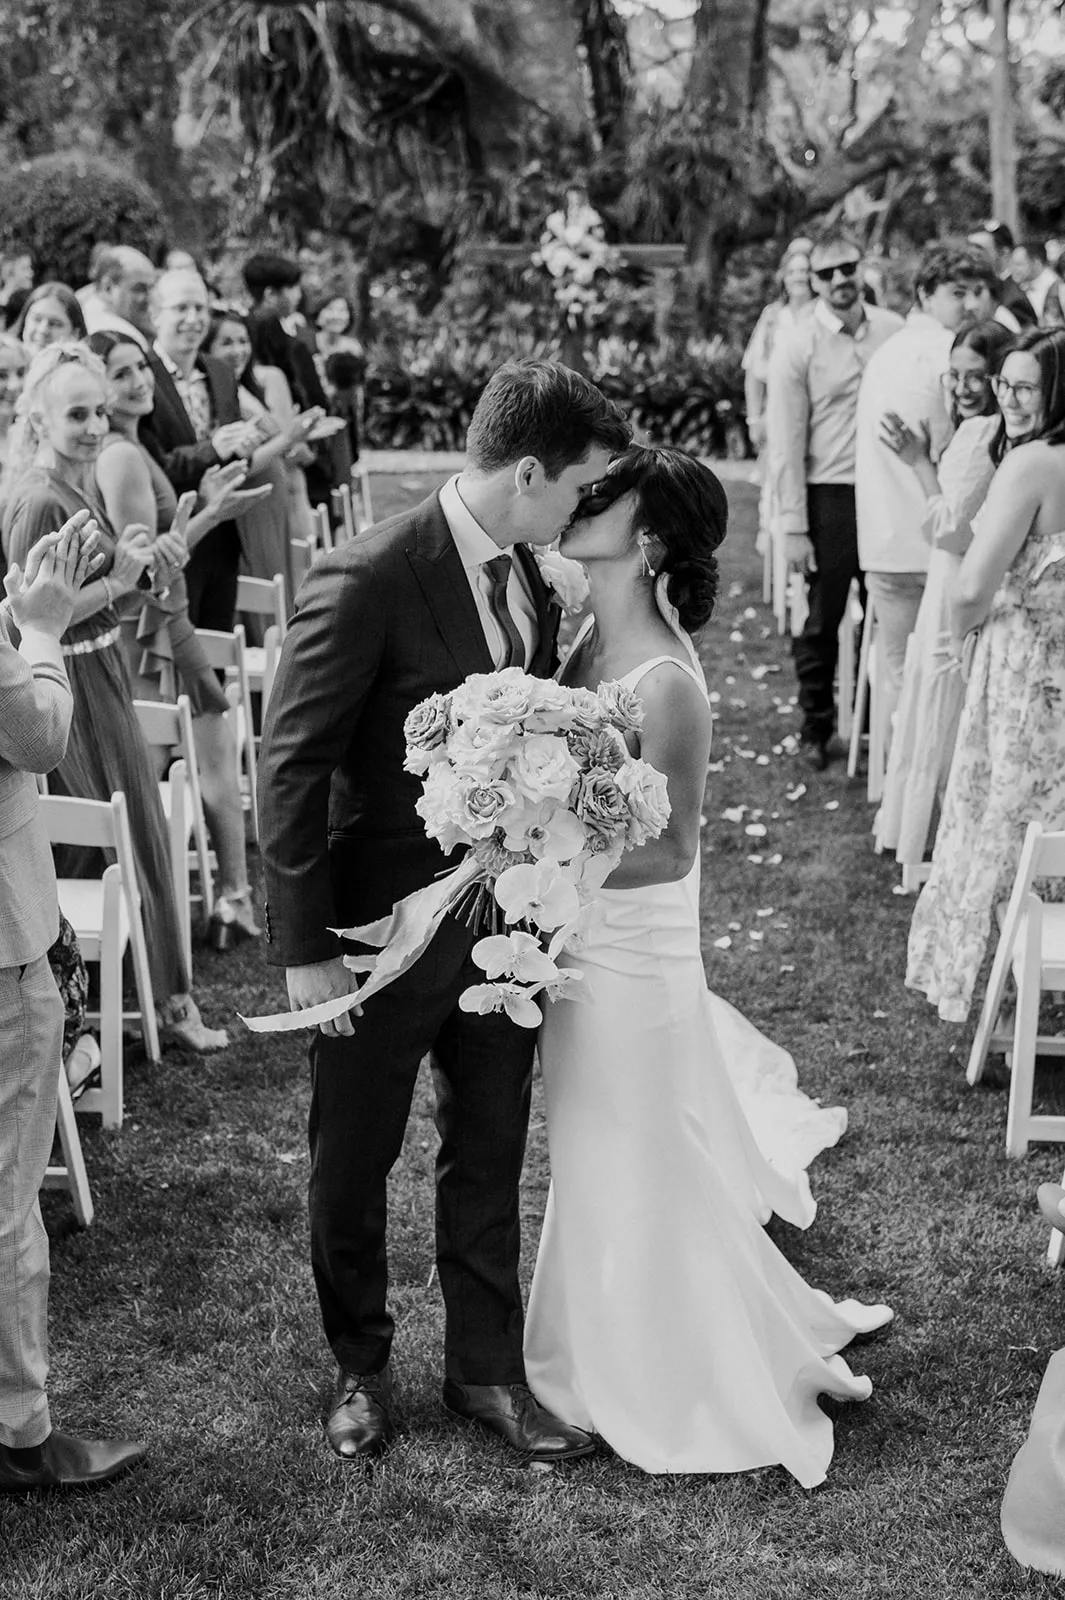 A couple shares a kiss while holding a bouquet of flowers as they walk down the aisle at their outdoor wedding ceremony. Guests on both sides stand and applaud. The setting is lush and green, suggesting a garden venue. The photo is in black and white.